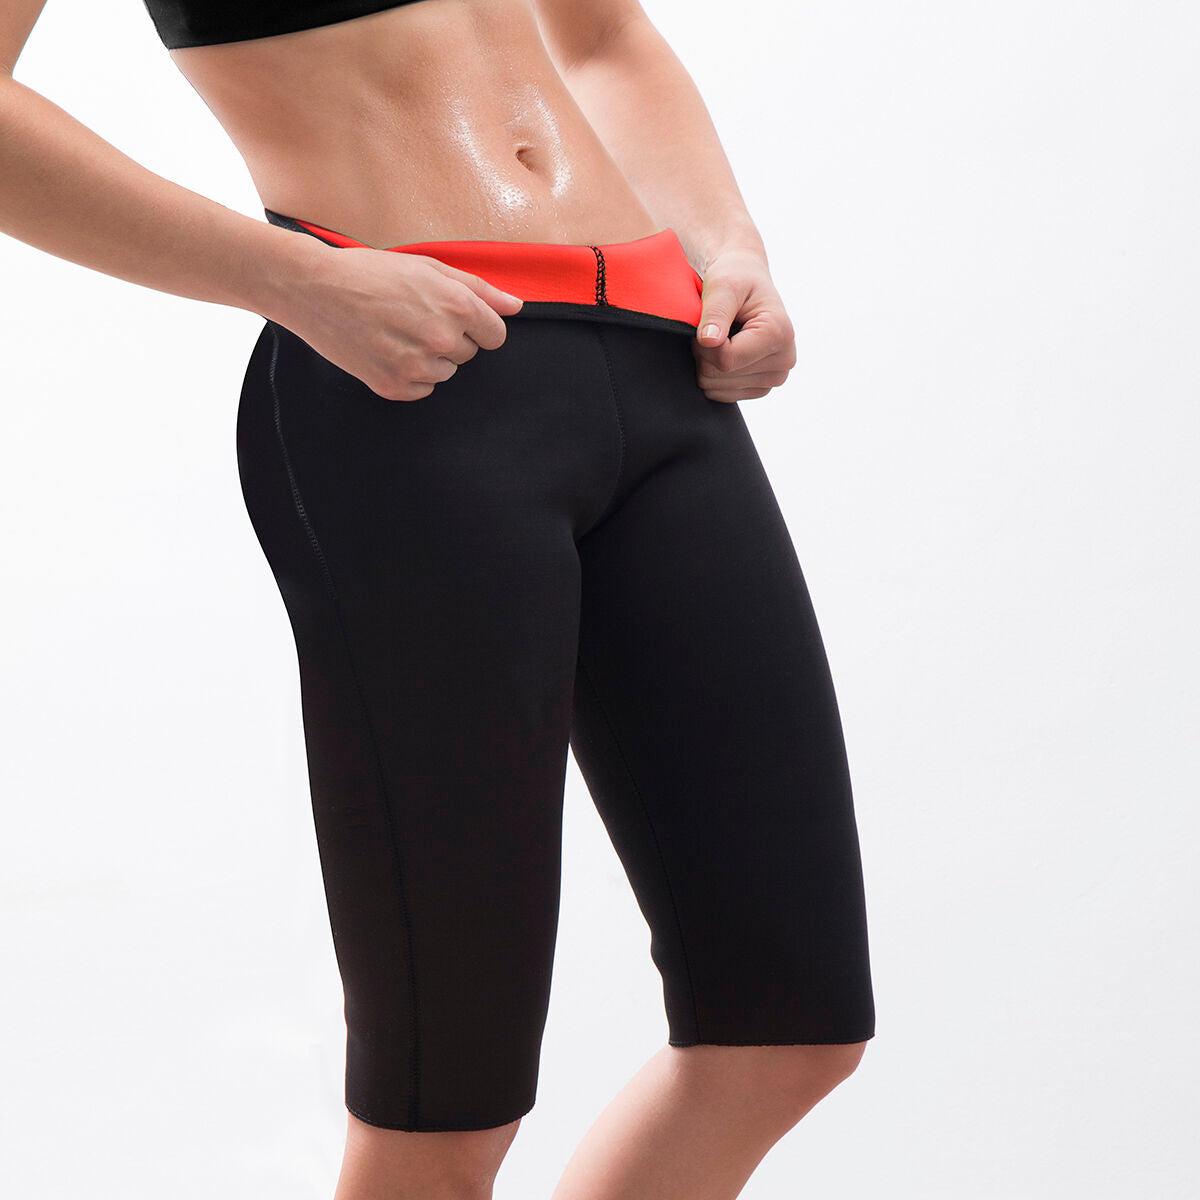 Slimming Knee Length  Sports Leggings with Sauna Effect Swaglia InnovaGoods